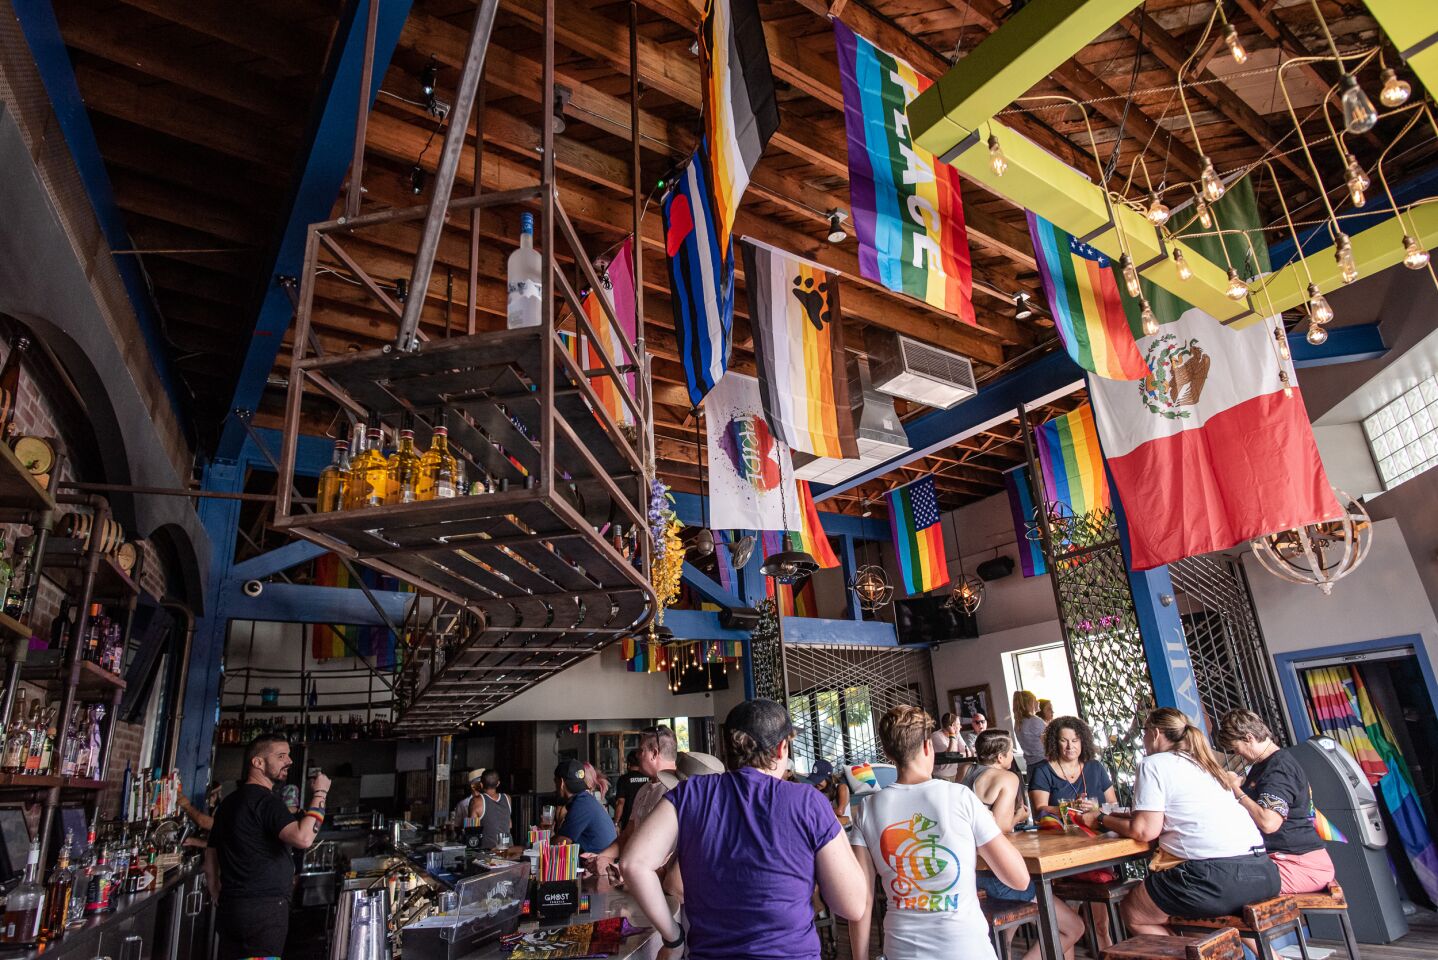 San Diego showed its colors and celebrated Pride at The Rail in Hillcrest on Saturday, July 17, 2021.